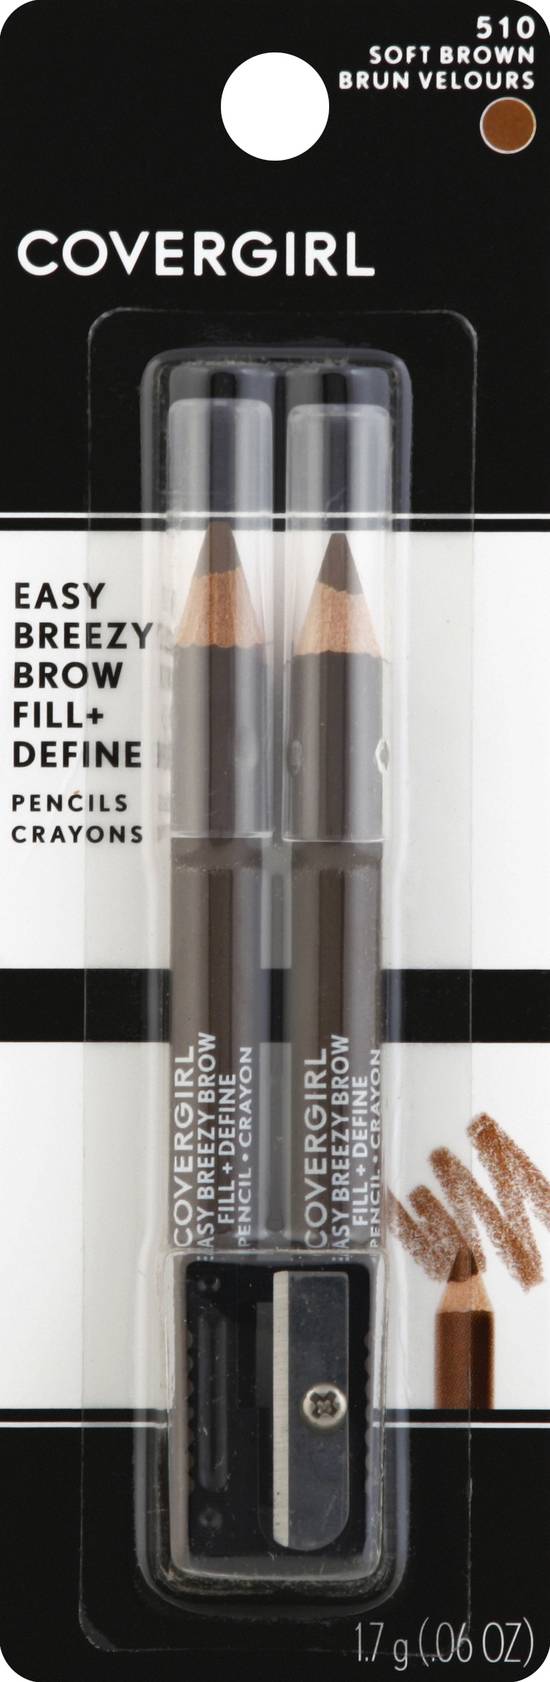 Covergirl Brow & Eye Makers Soft Brown 510